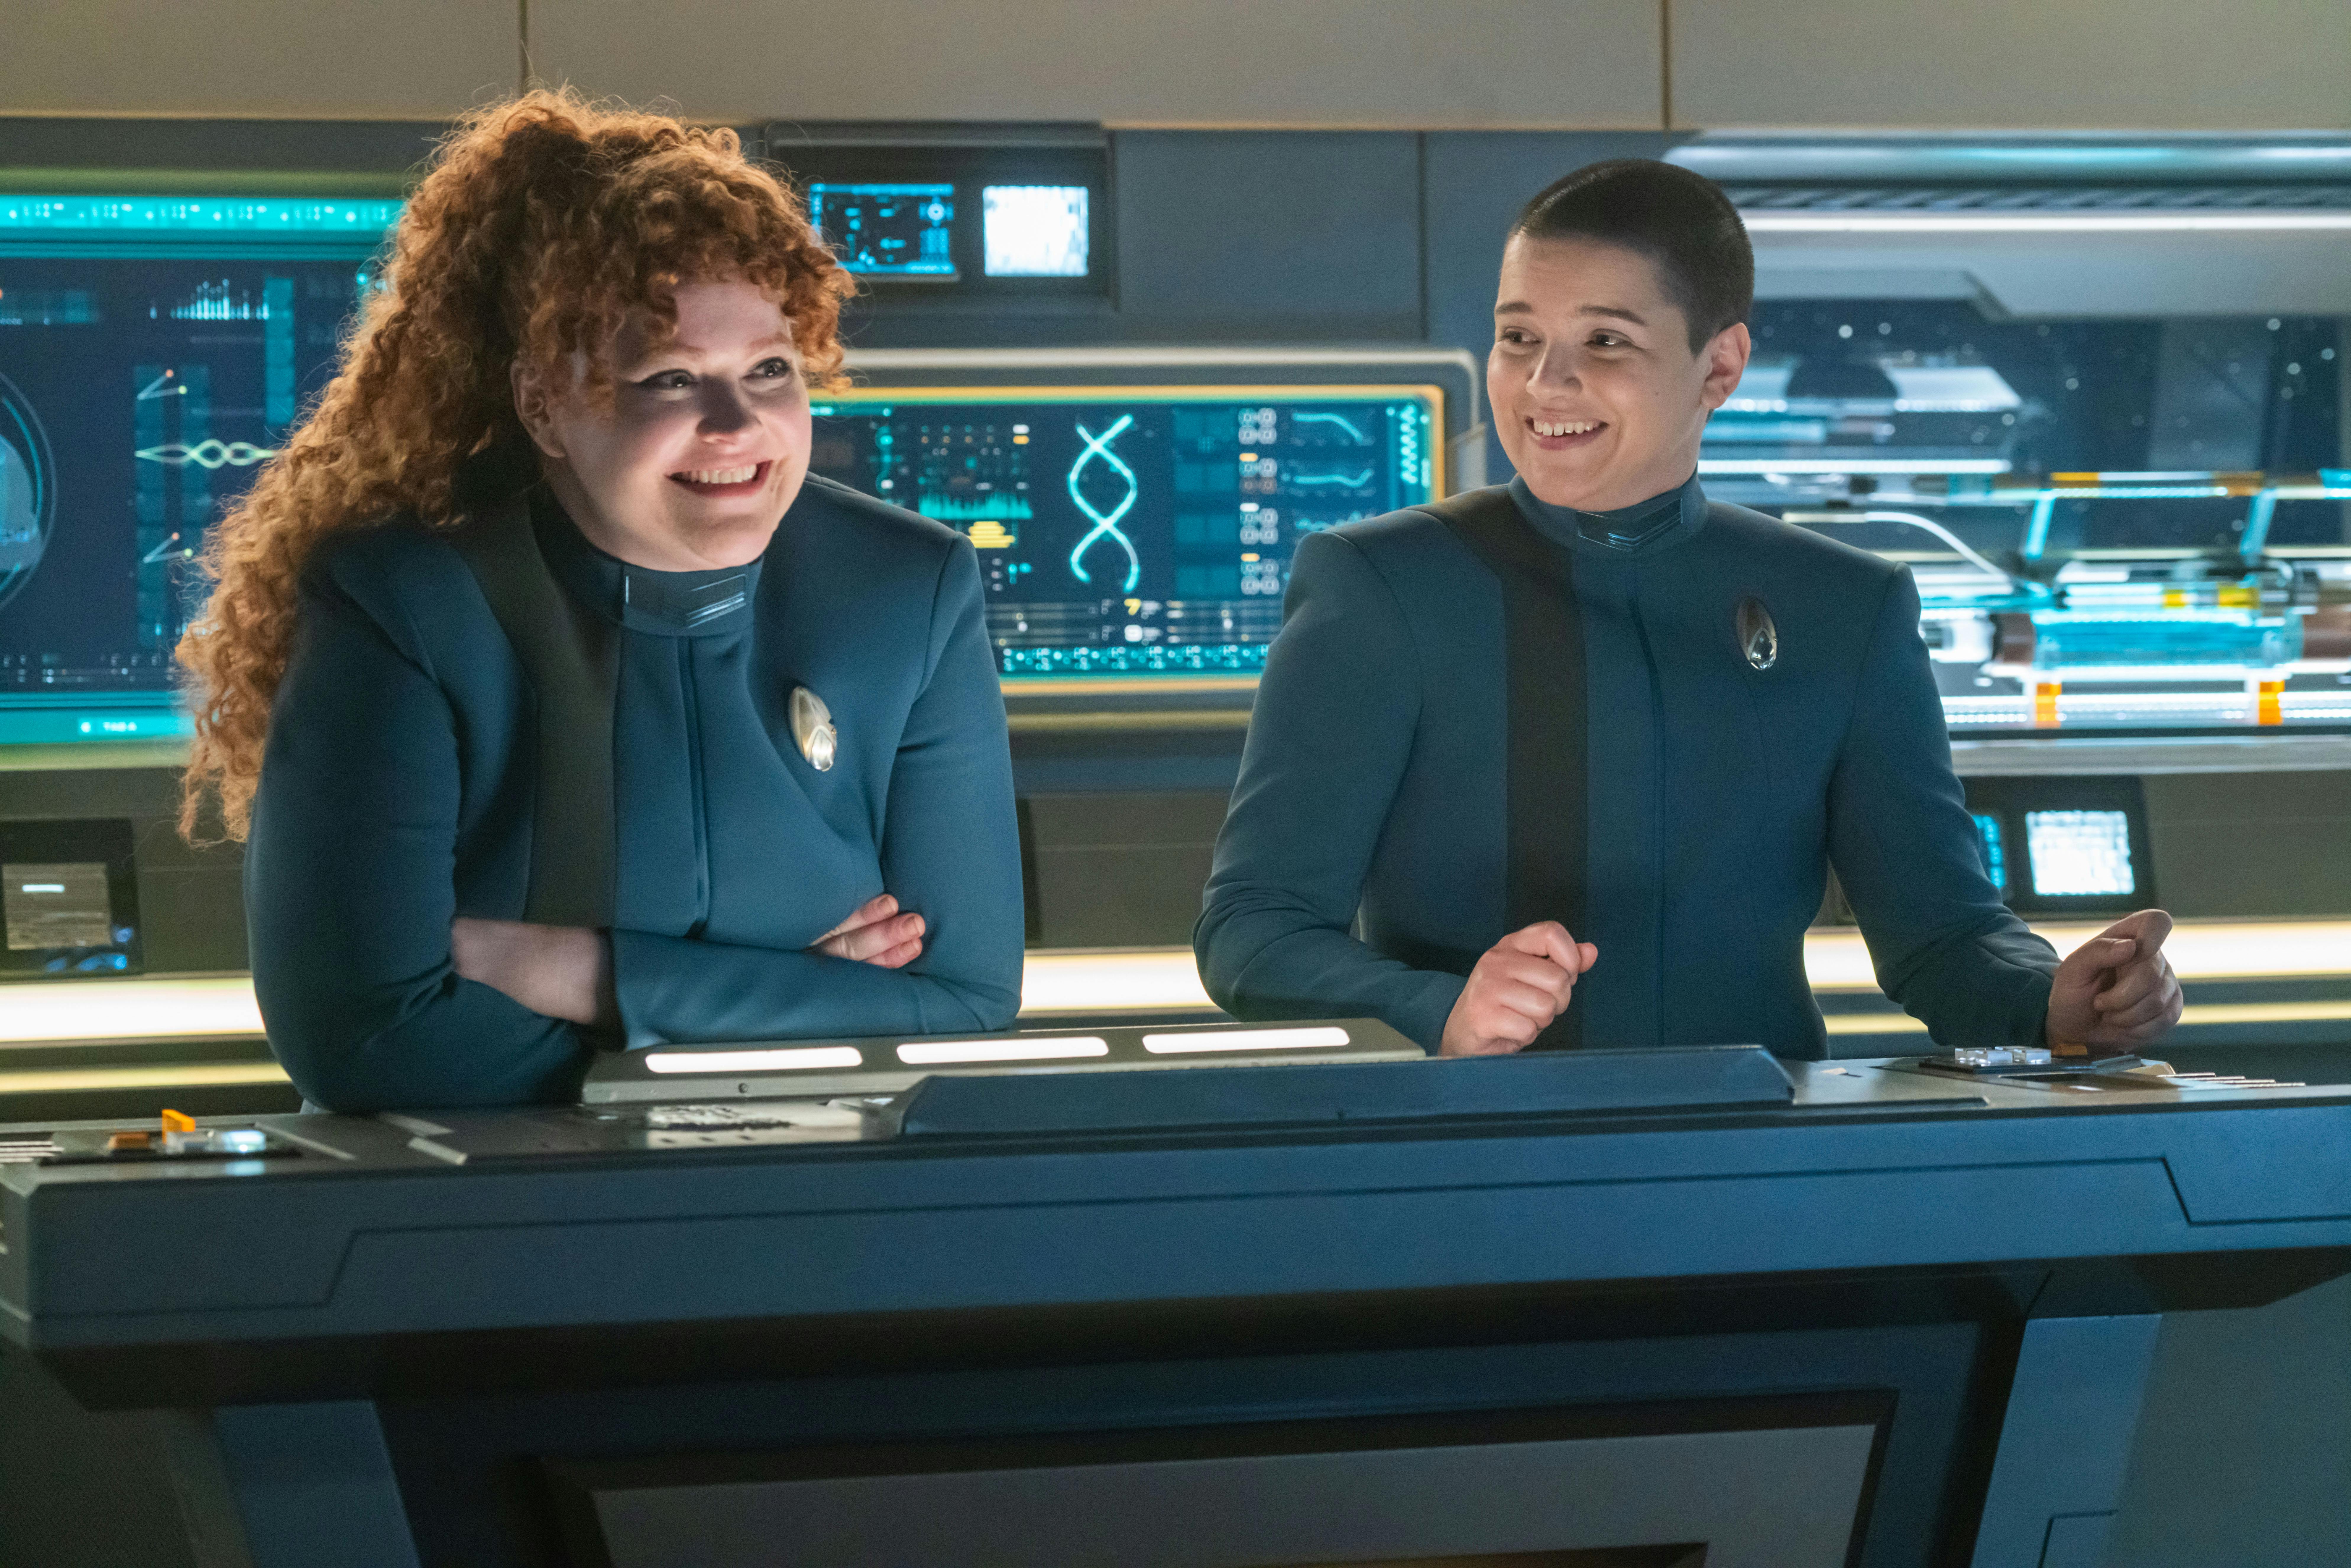 Tilly and Adira are smiling and in good spirits as they lean towards a computer panel in the Science Lab in 'Erigah'